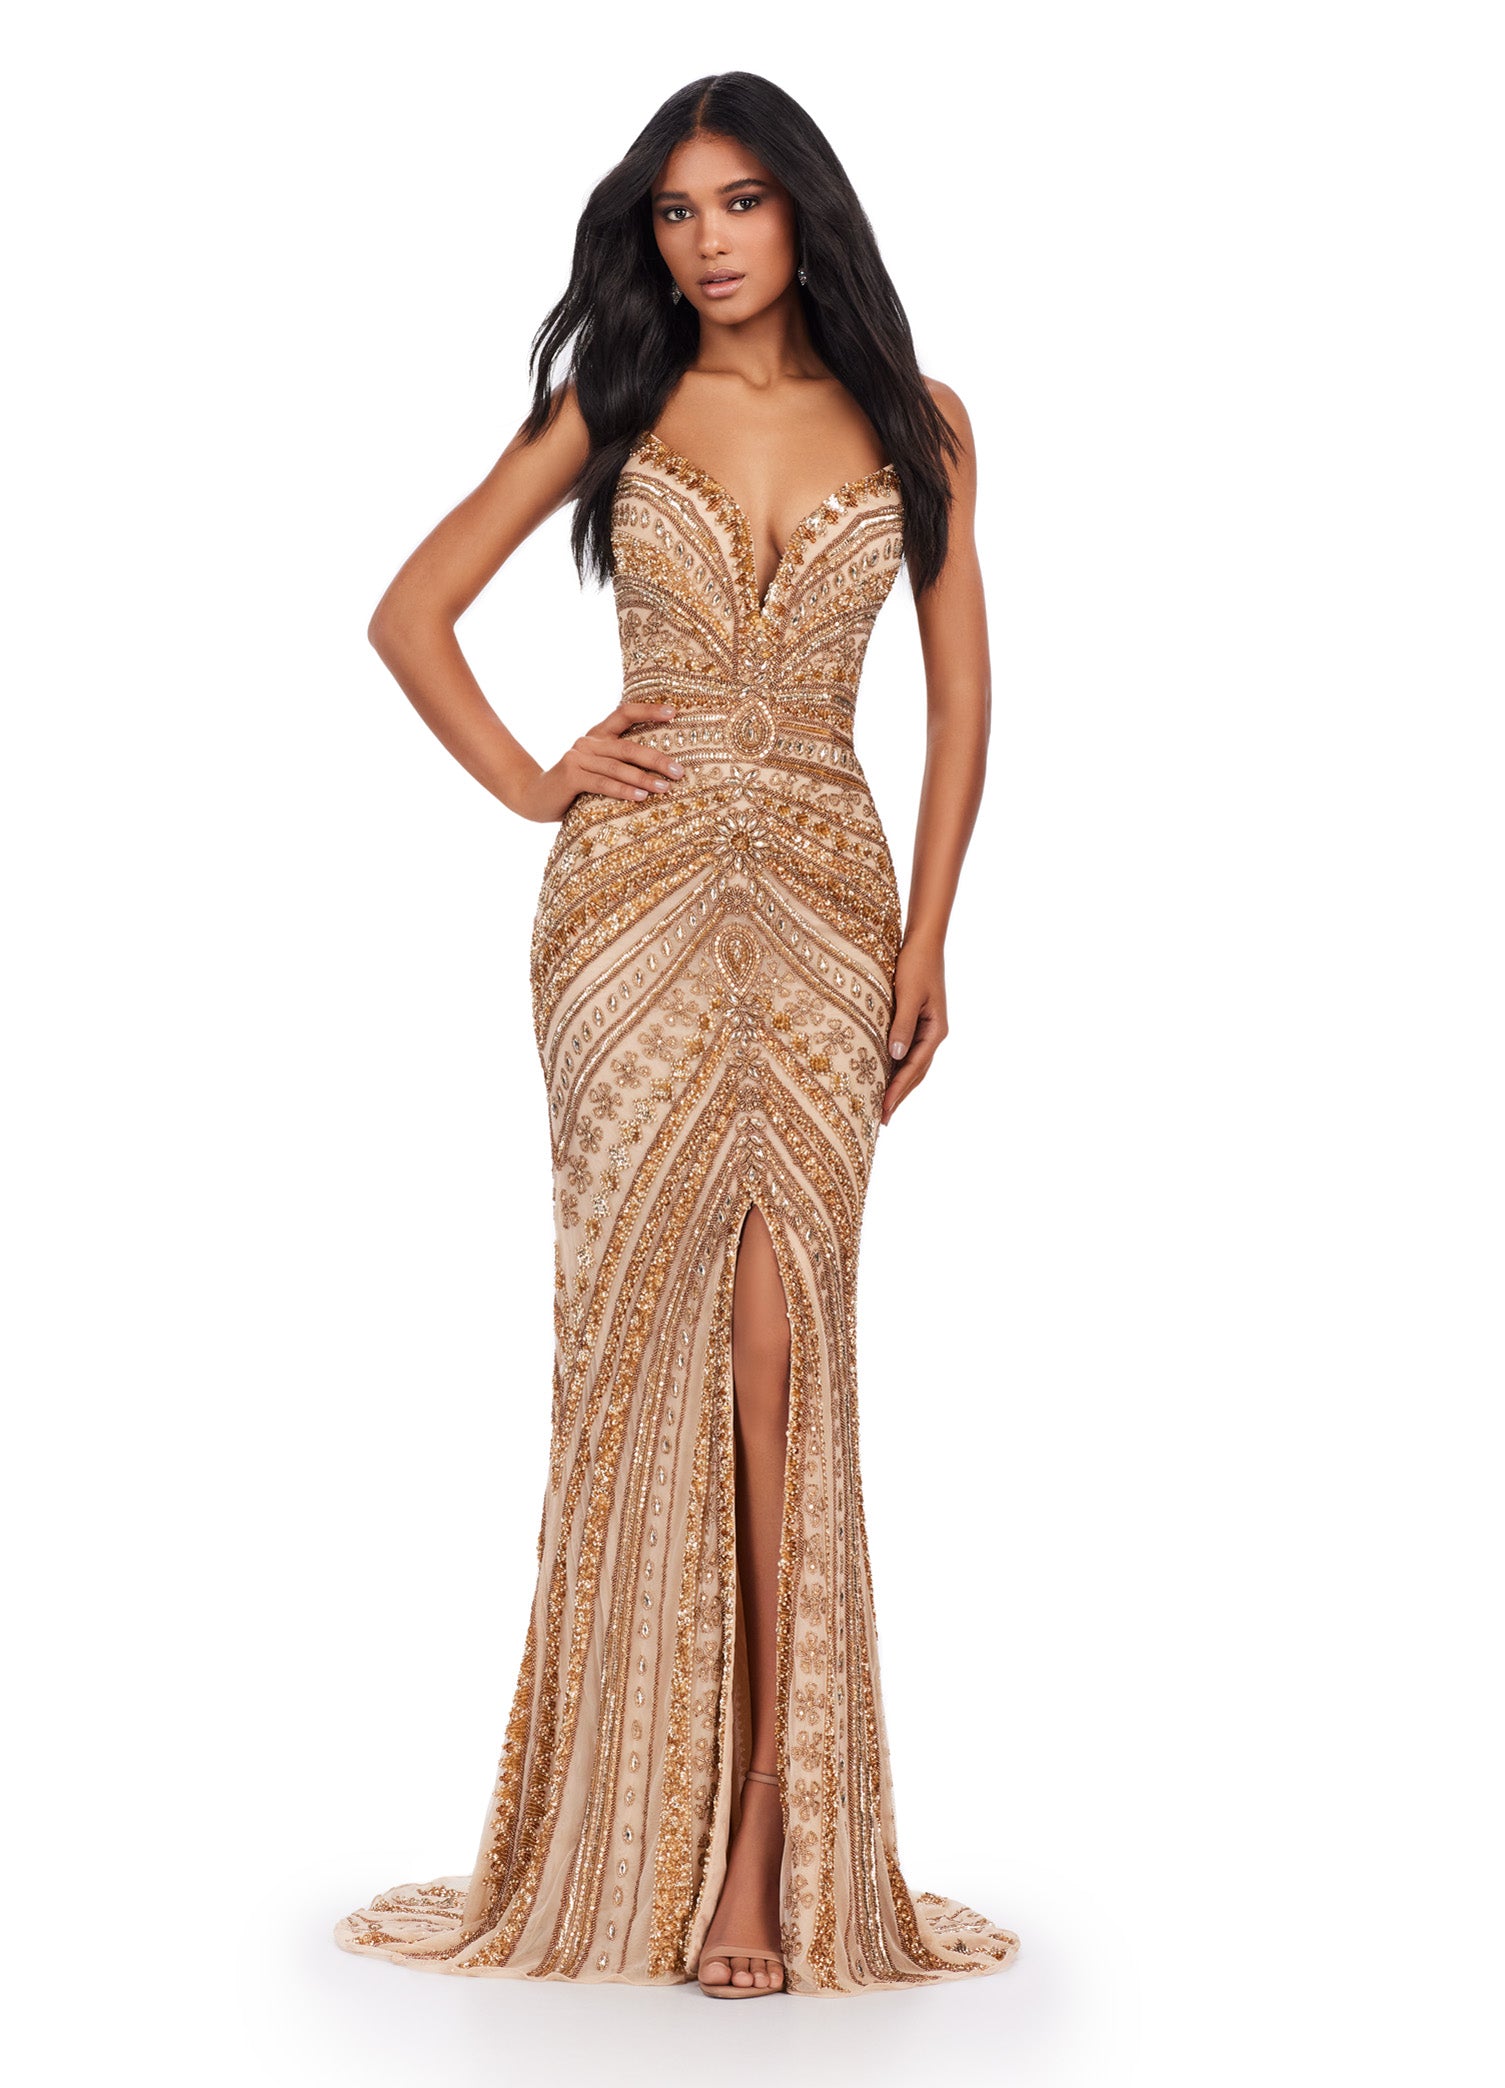 Elevate your style in the stunning Ashley Lauren 11488 Long Prom Dress. This fully beaded strapless gown features a sweetheart neckline and a flattering slit for a touch of glamour. Perfect for any formal occasion or pageant, this dress is sure to make you stand out. All eyes on you in this fabulous strapless gown! This fully beaded dress features a center slit and an intricate beaded pattern.